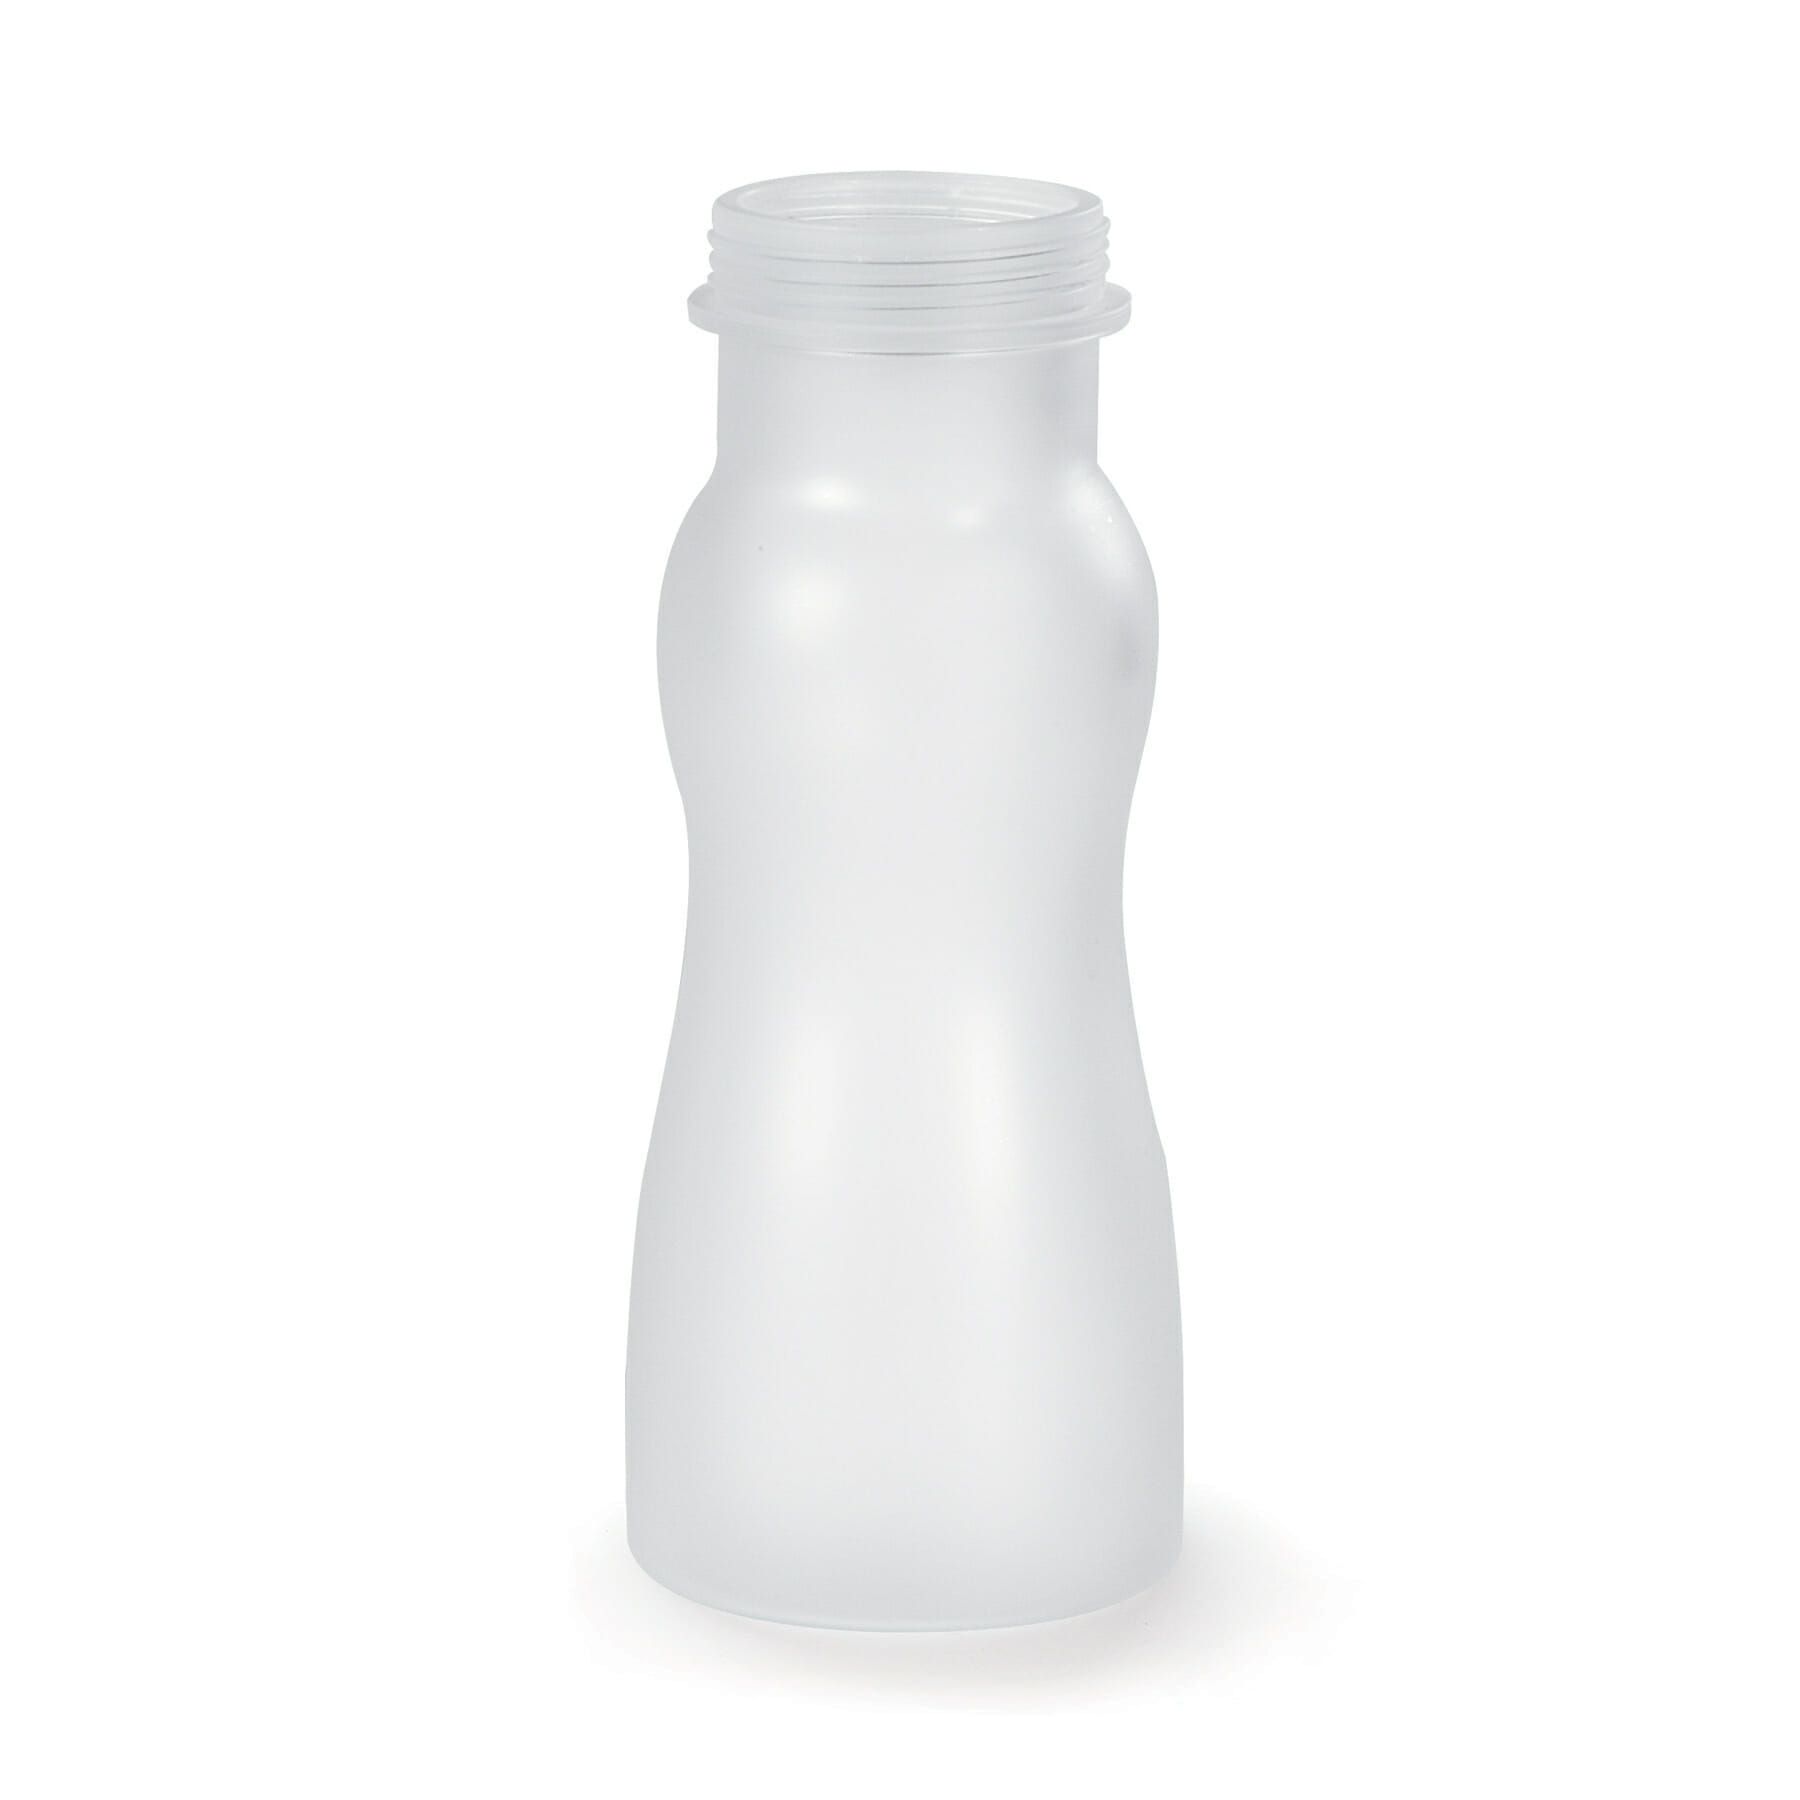 16 oz. Salad Dressing Bottle, 7.3" Tall (Bottle Only), Frosted Clear